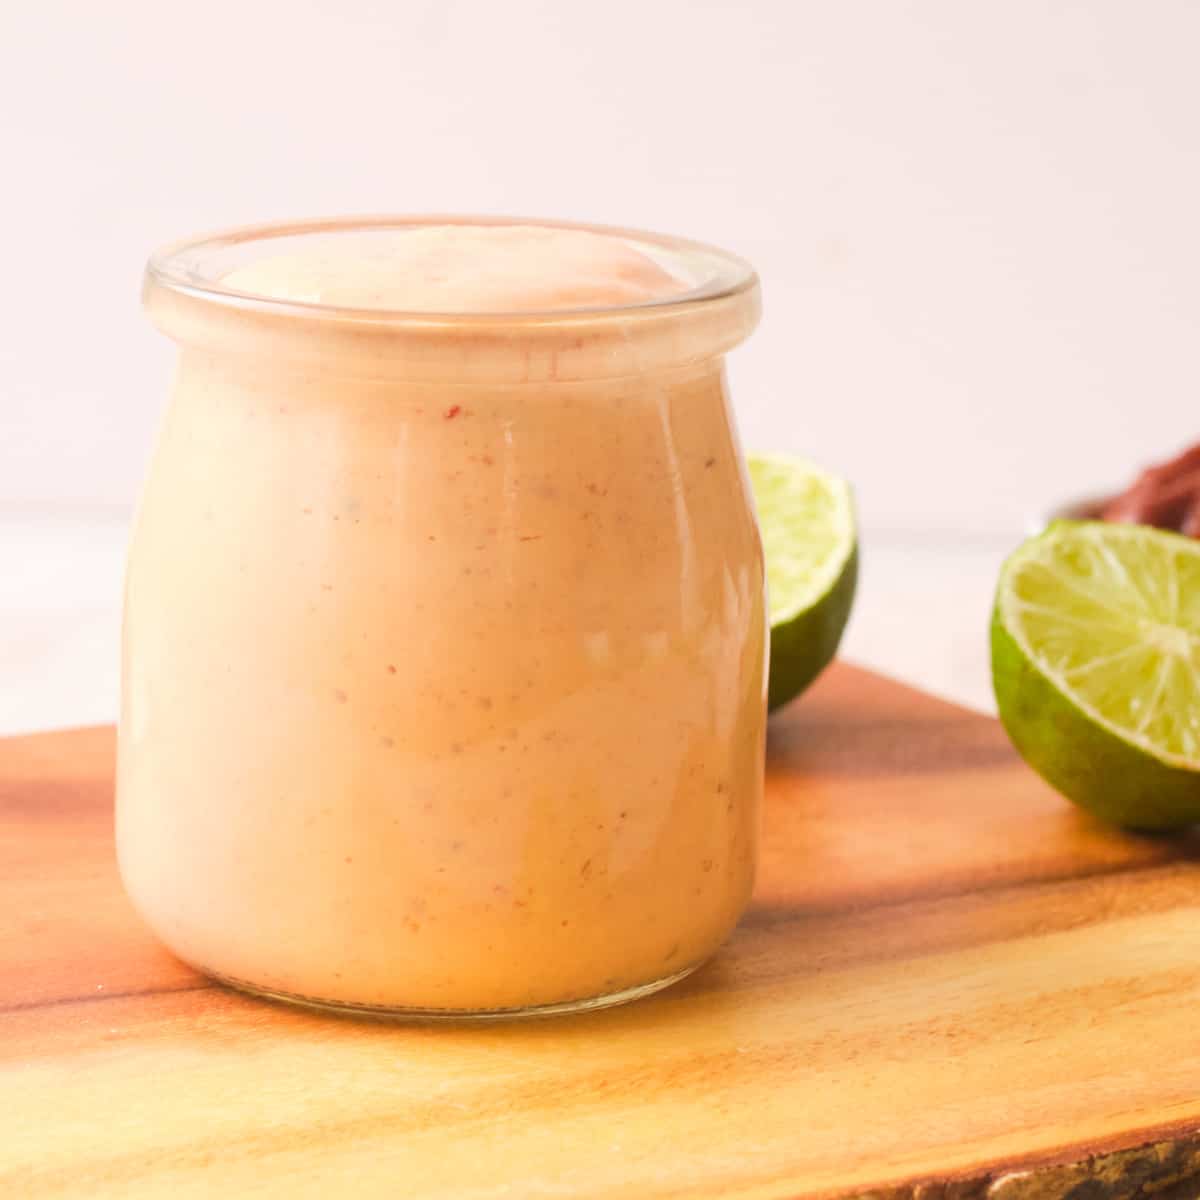 Vegan chipotle sauce in jar on wood cutting board with limes. 